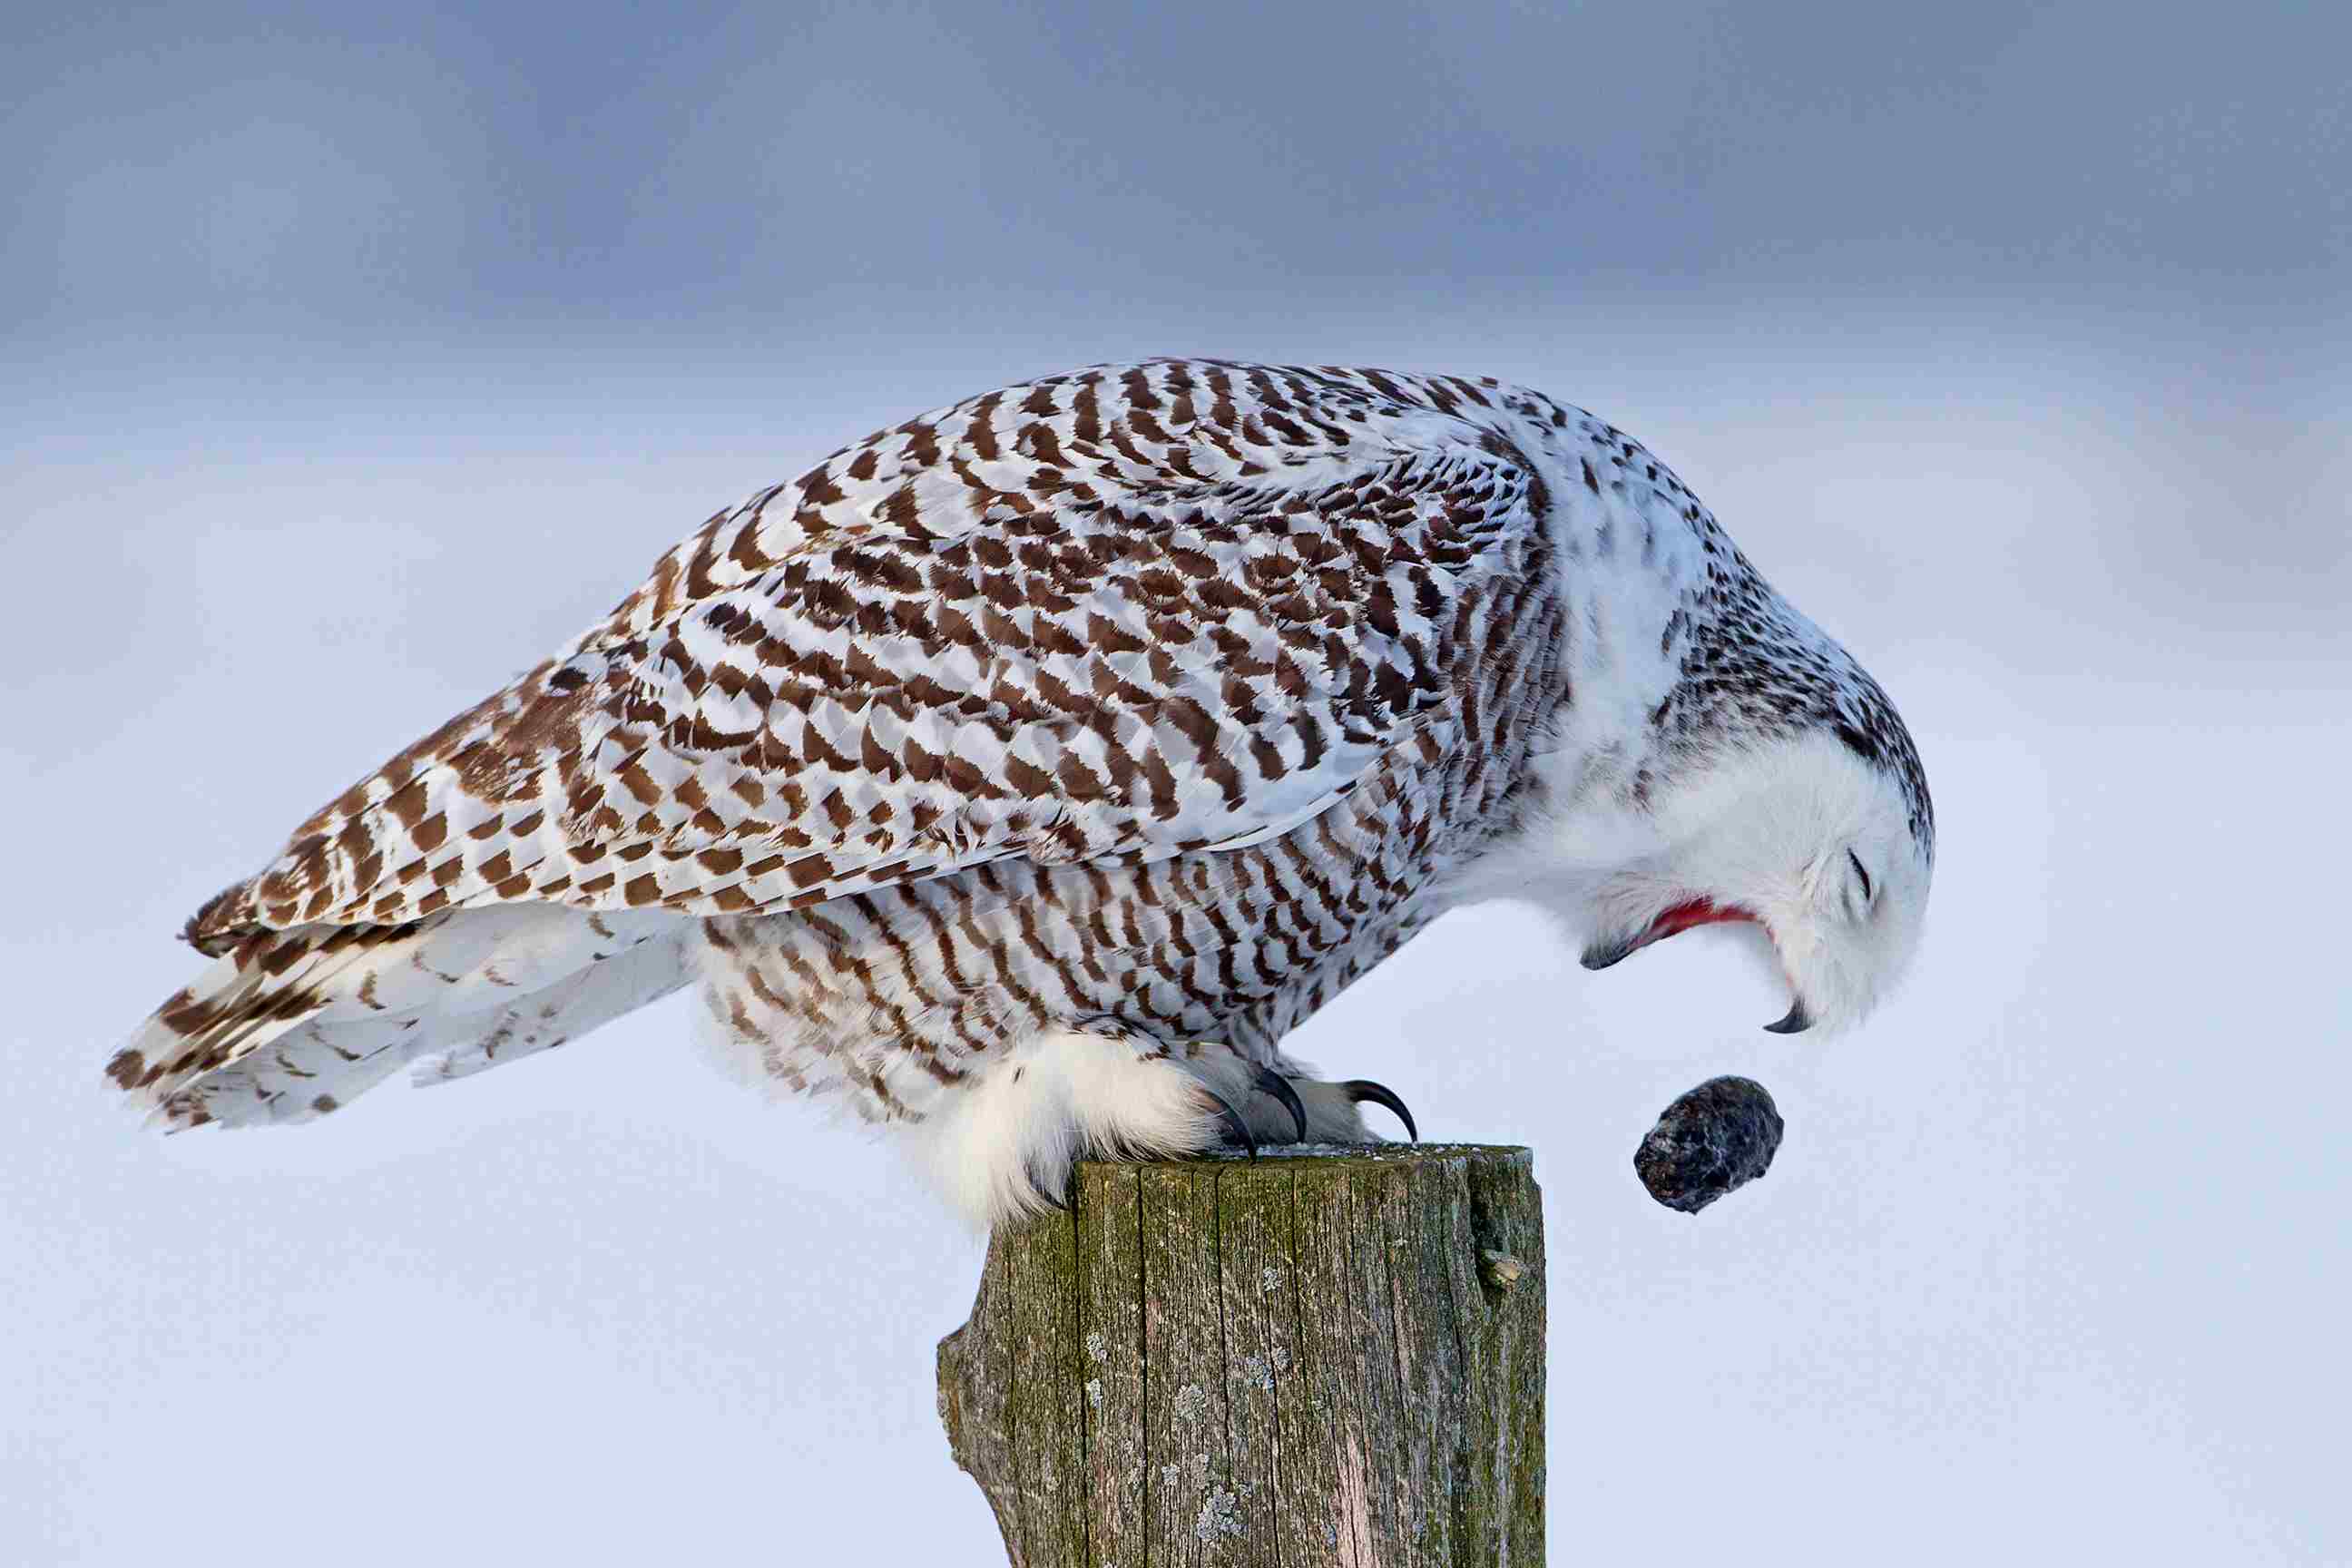 An owl dropping someing out of its mouth